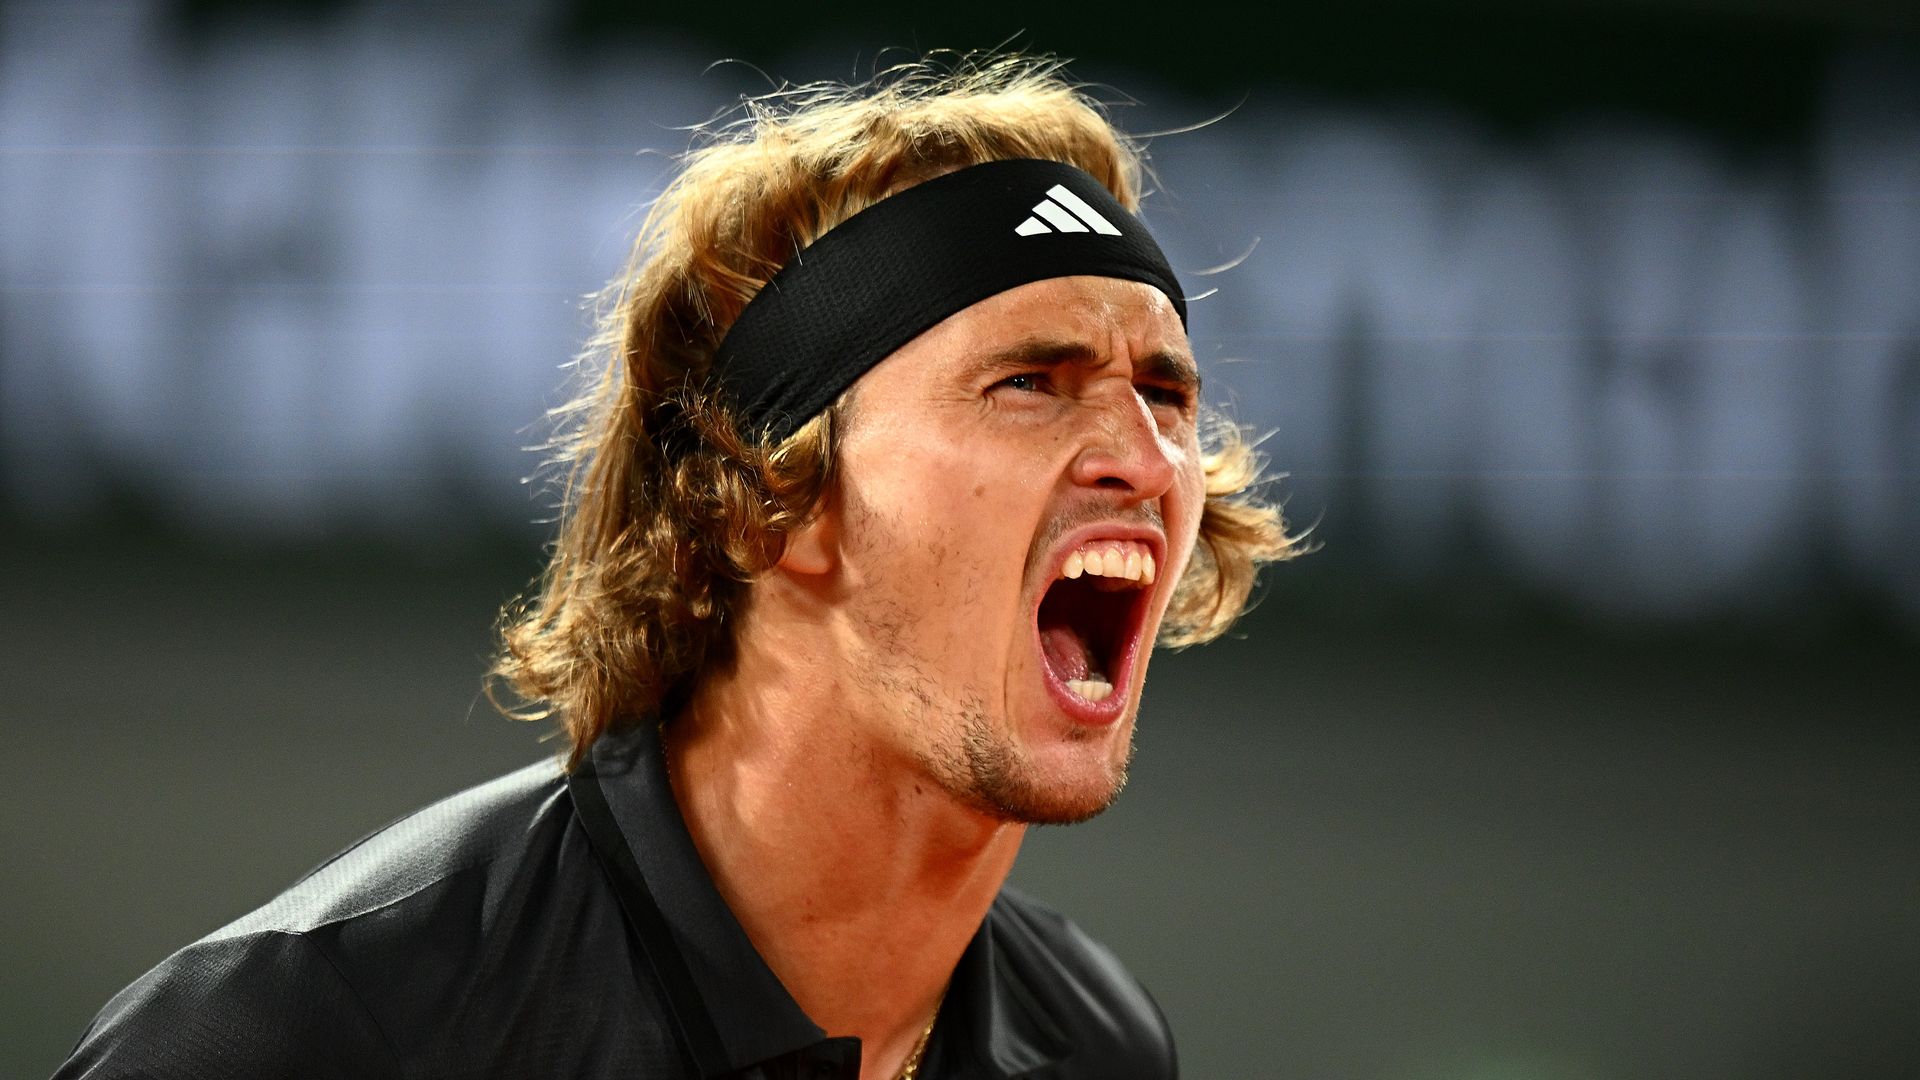 Ruud vs Zverev live stream how to watch French Open semifinal for